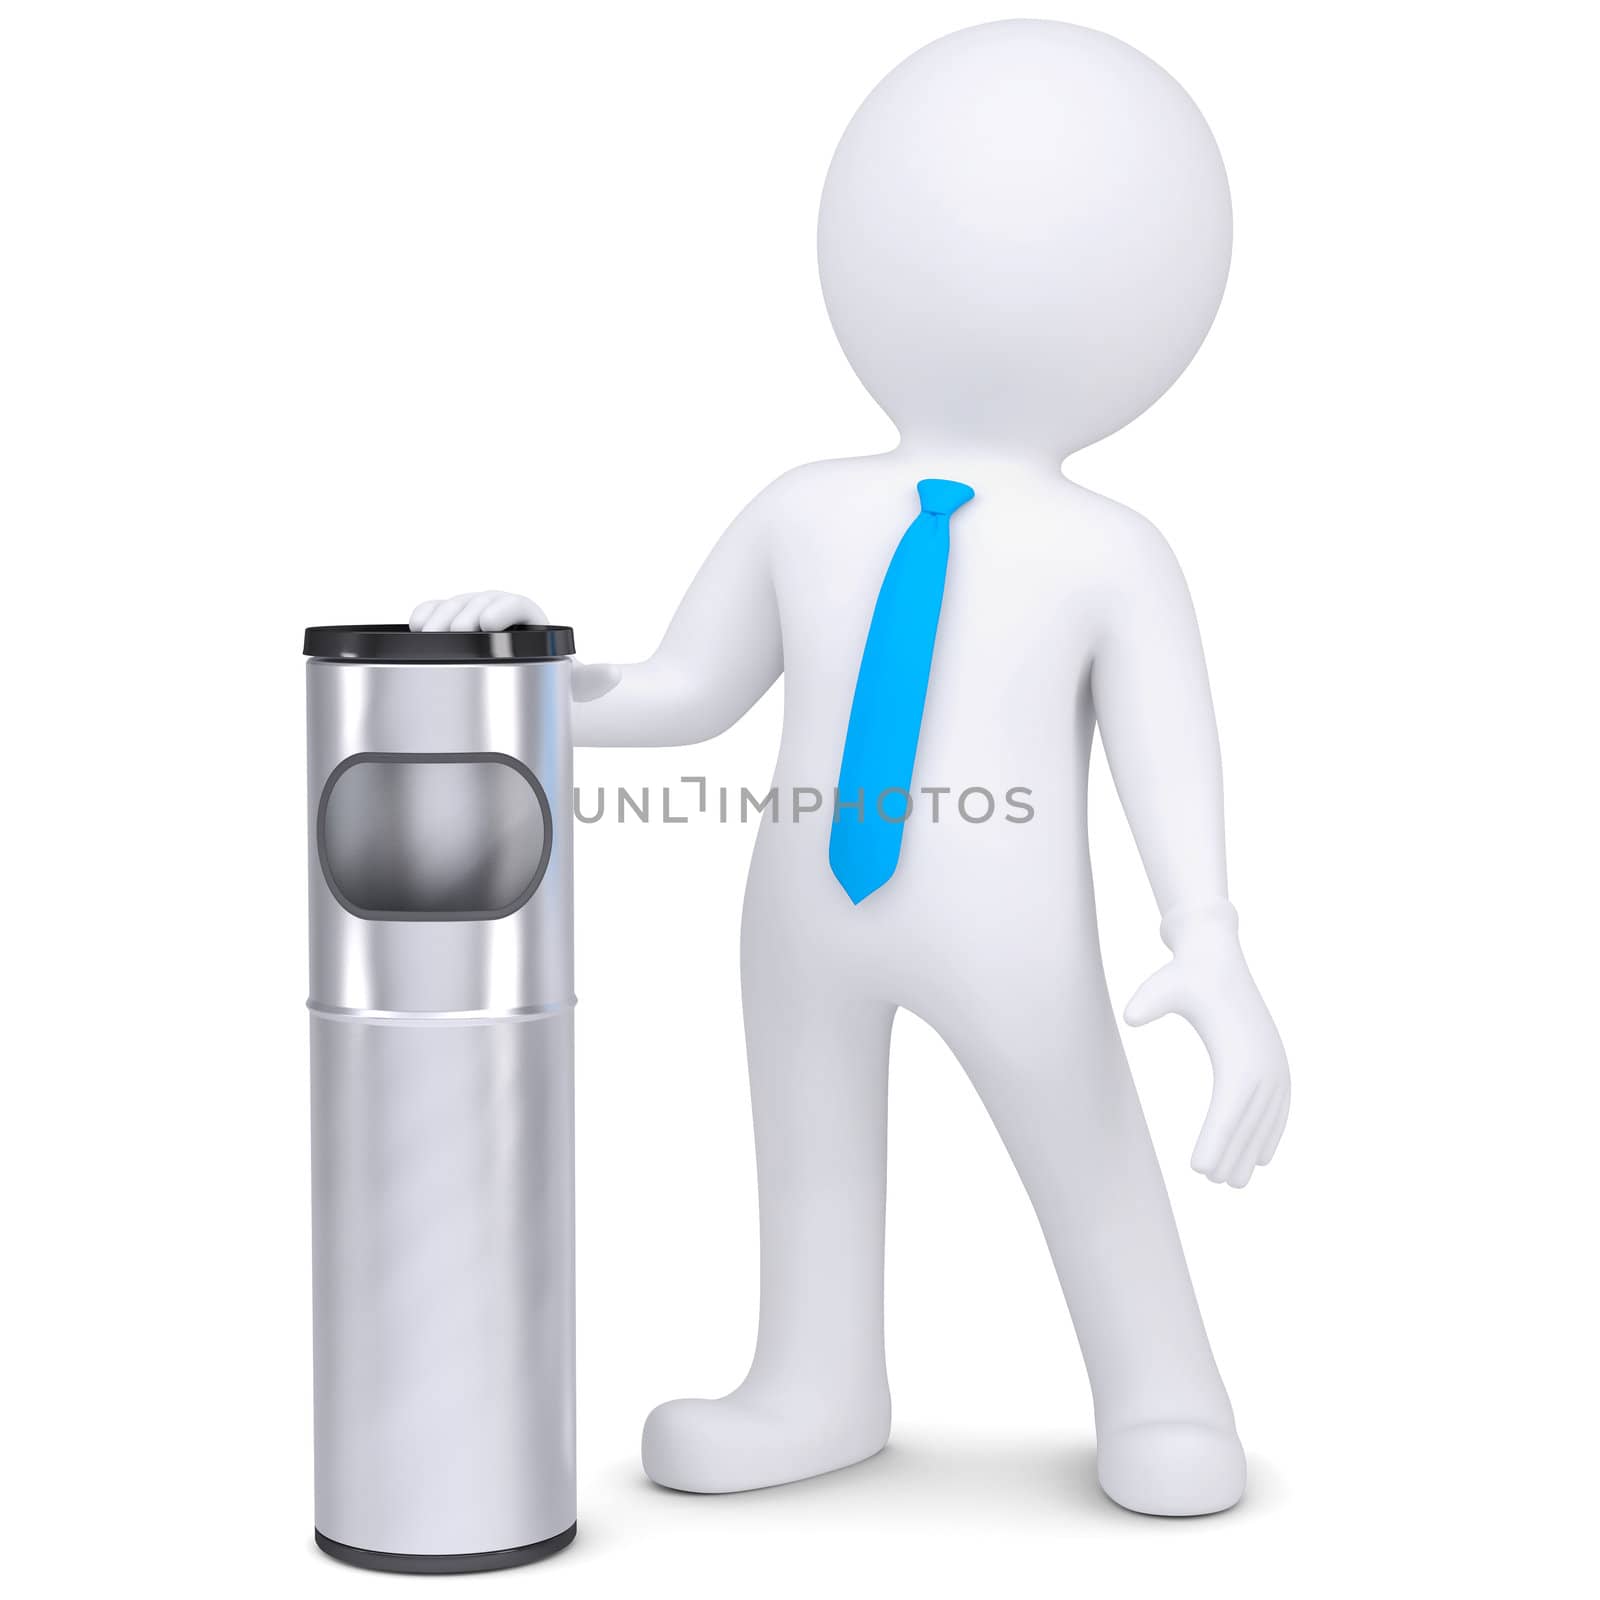 3d white man with a trash can. Isolated render on a white background